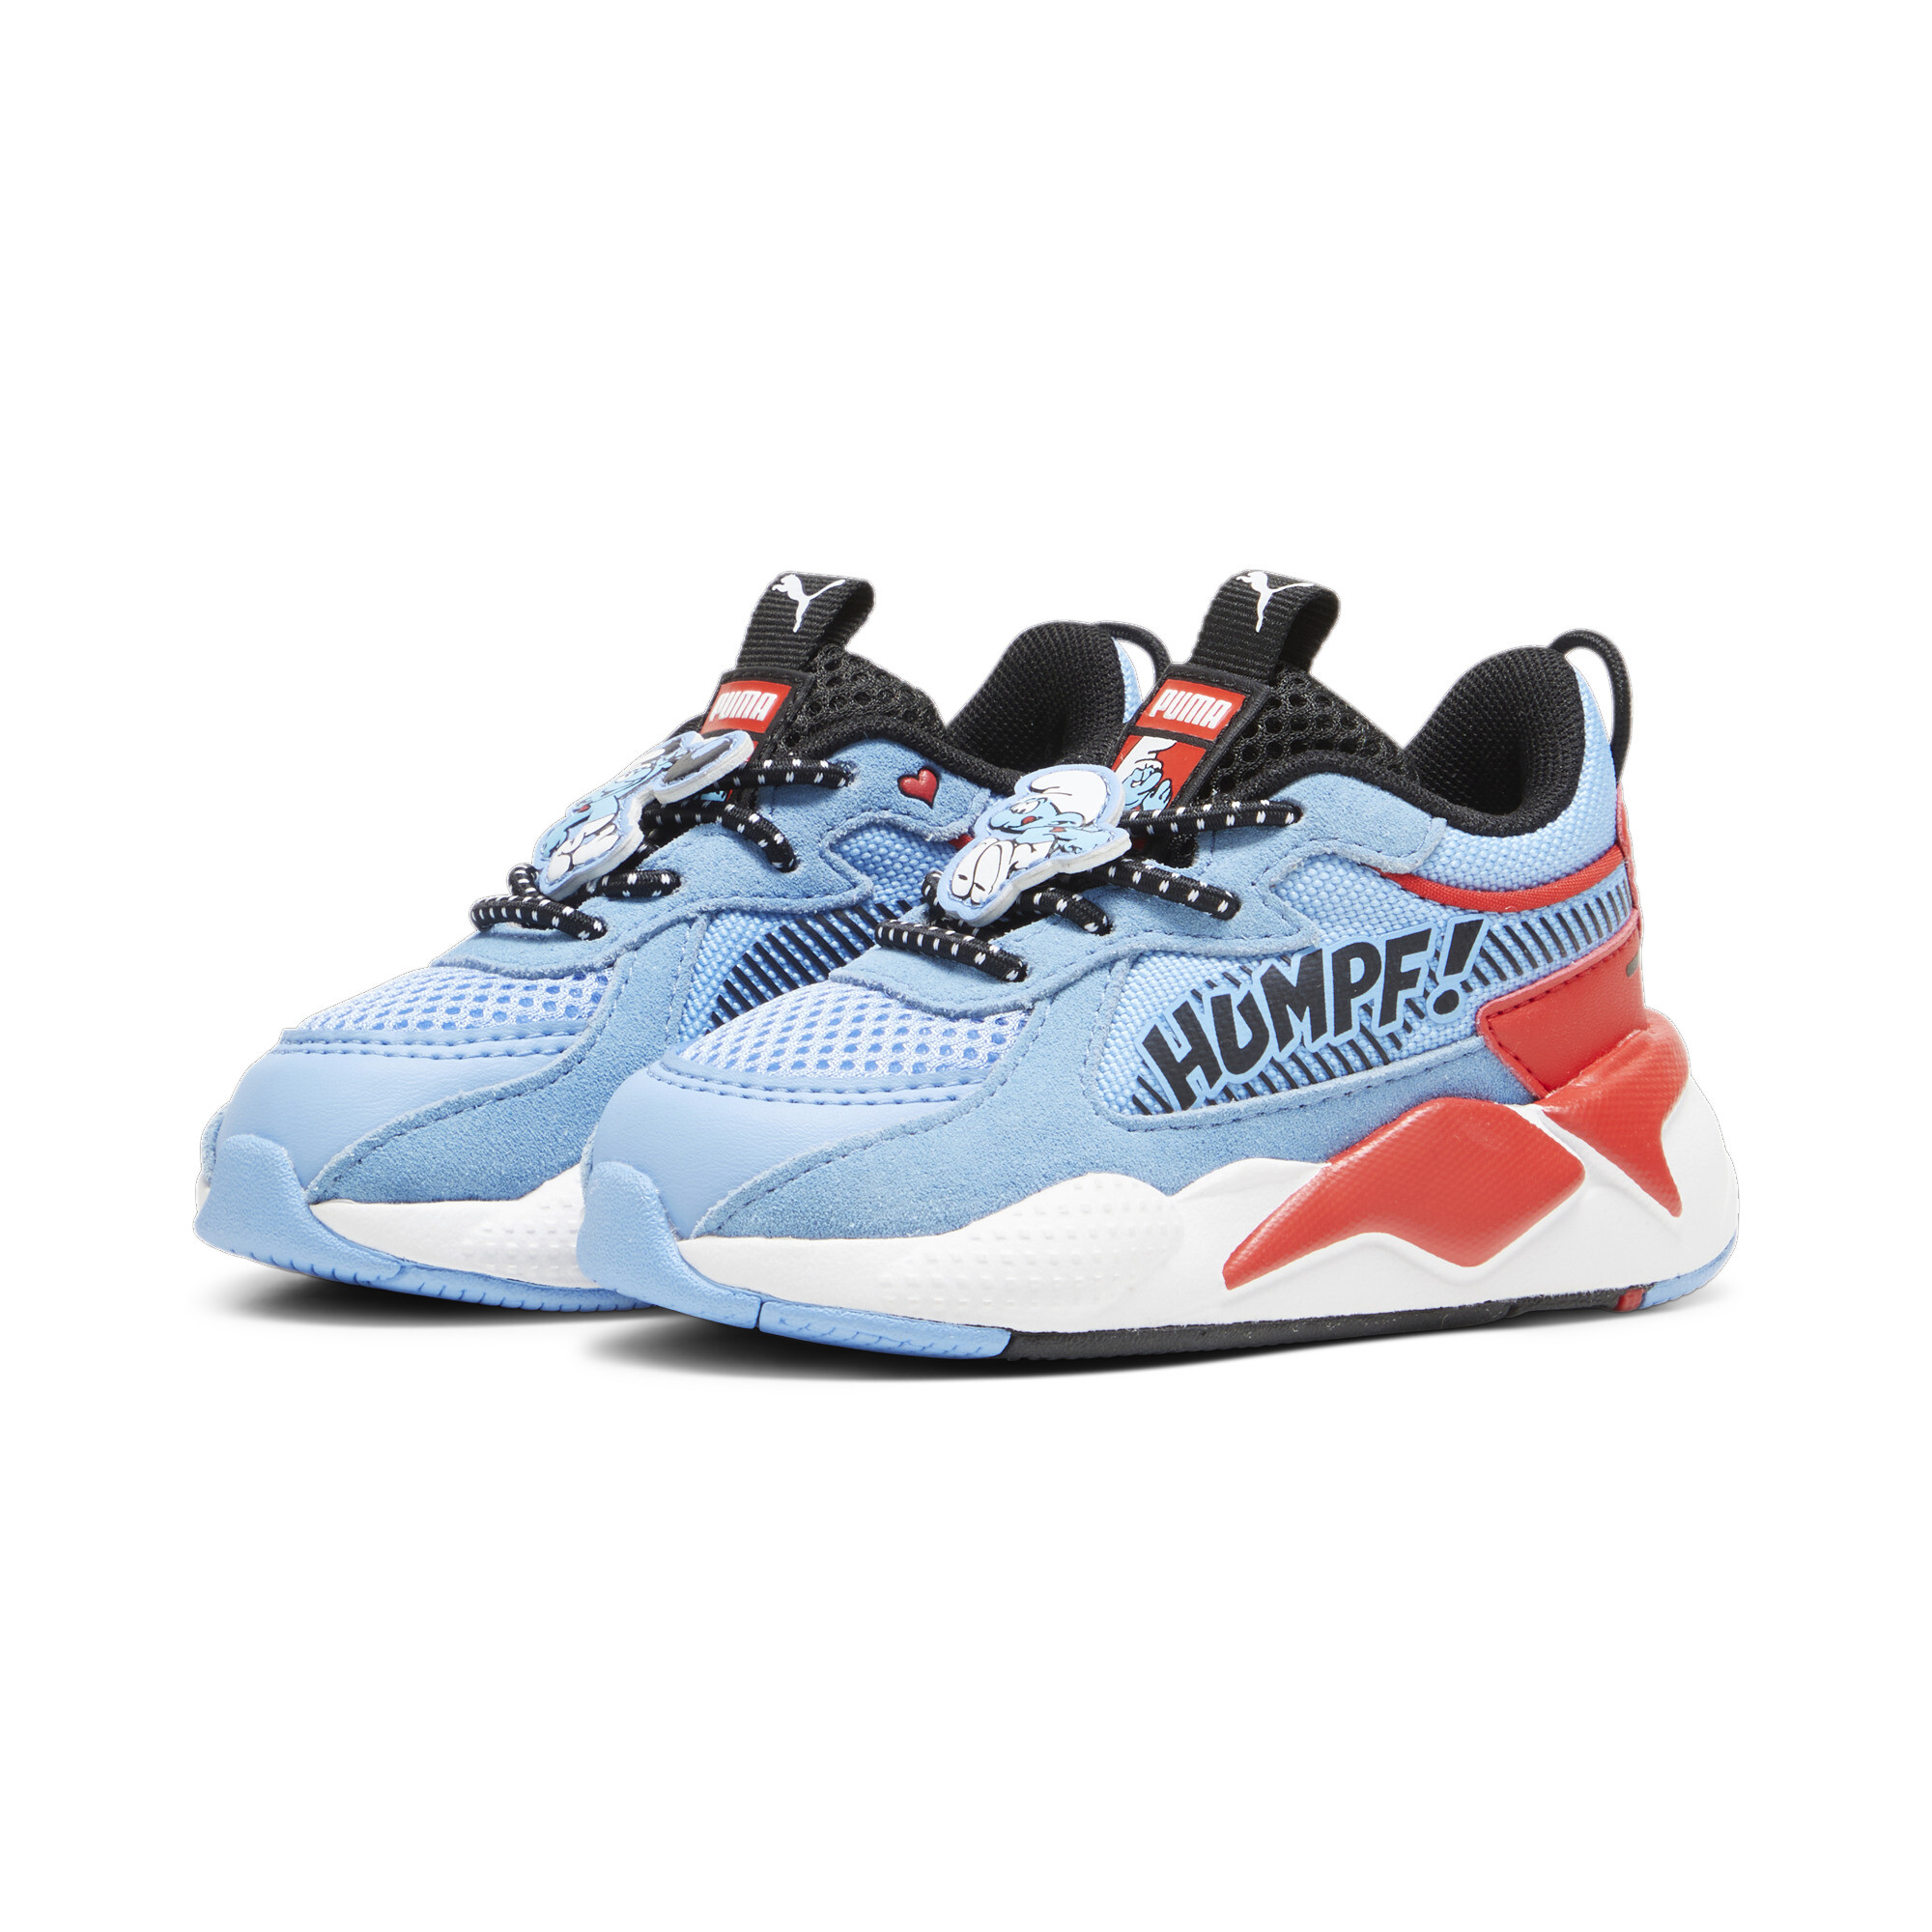 Kids' PUMA X THE SMURFS RS-X Toddlers' Sneakers In Blue, Size EU 27